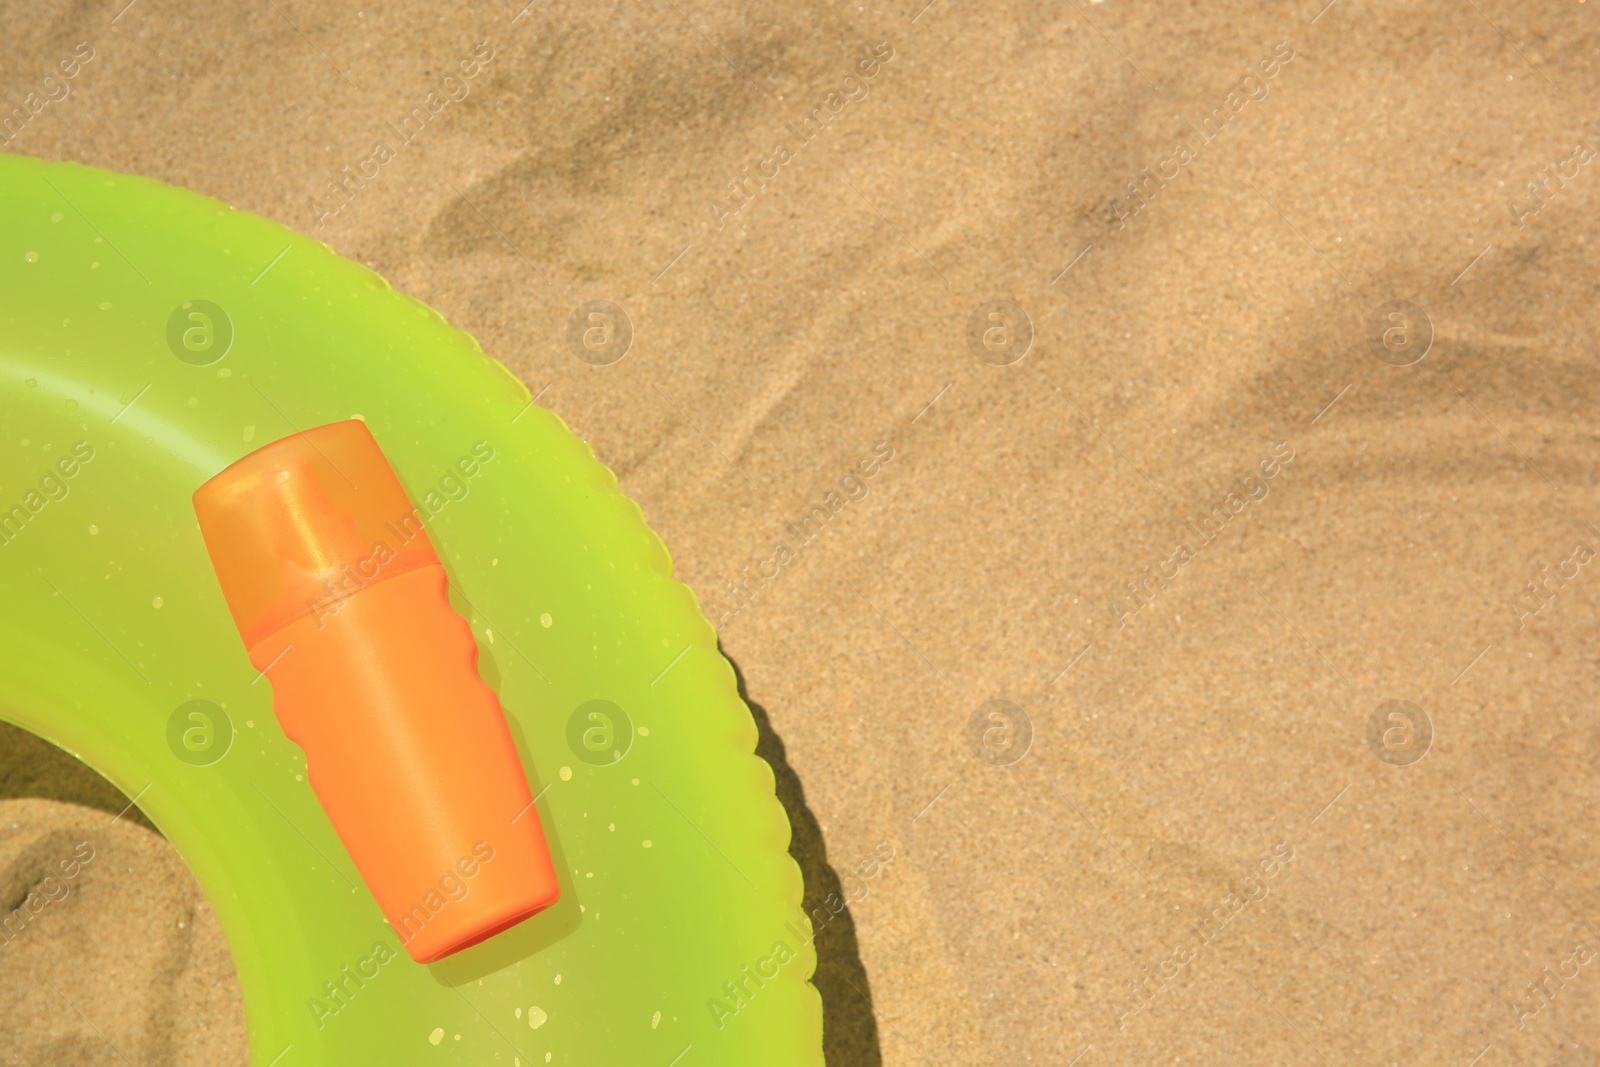 Photo of Sunscreen and inflatable ring on sand, top view with space for text. Sun protection care